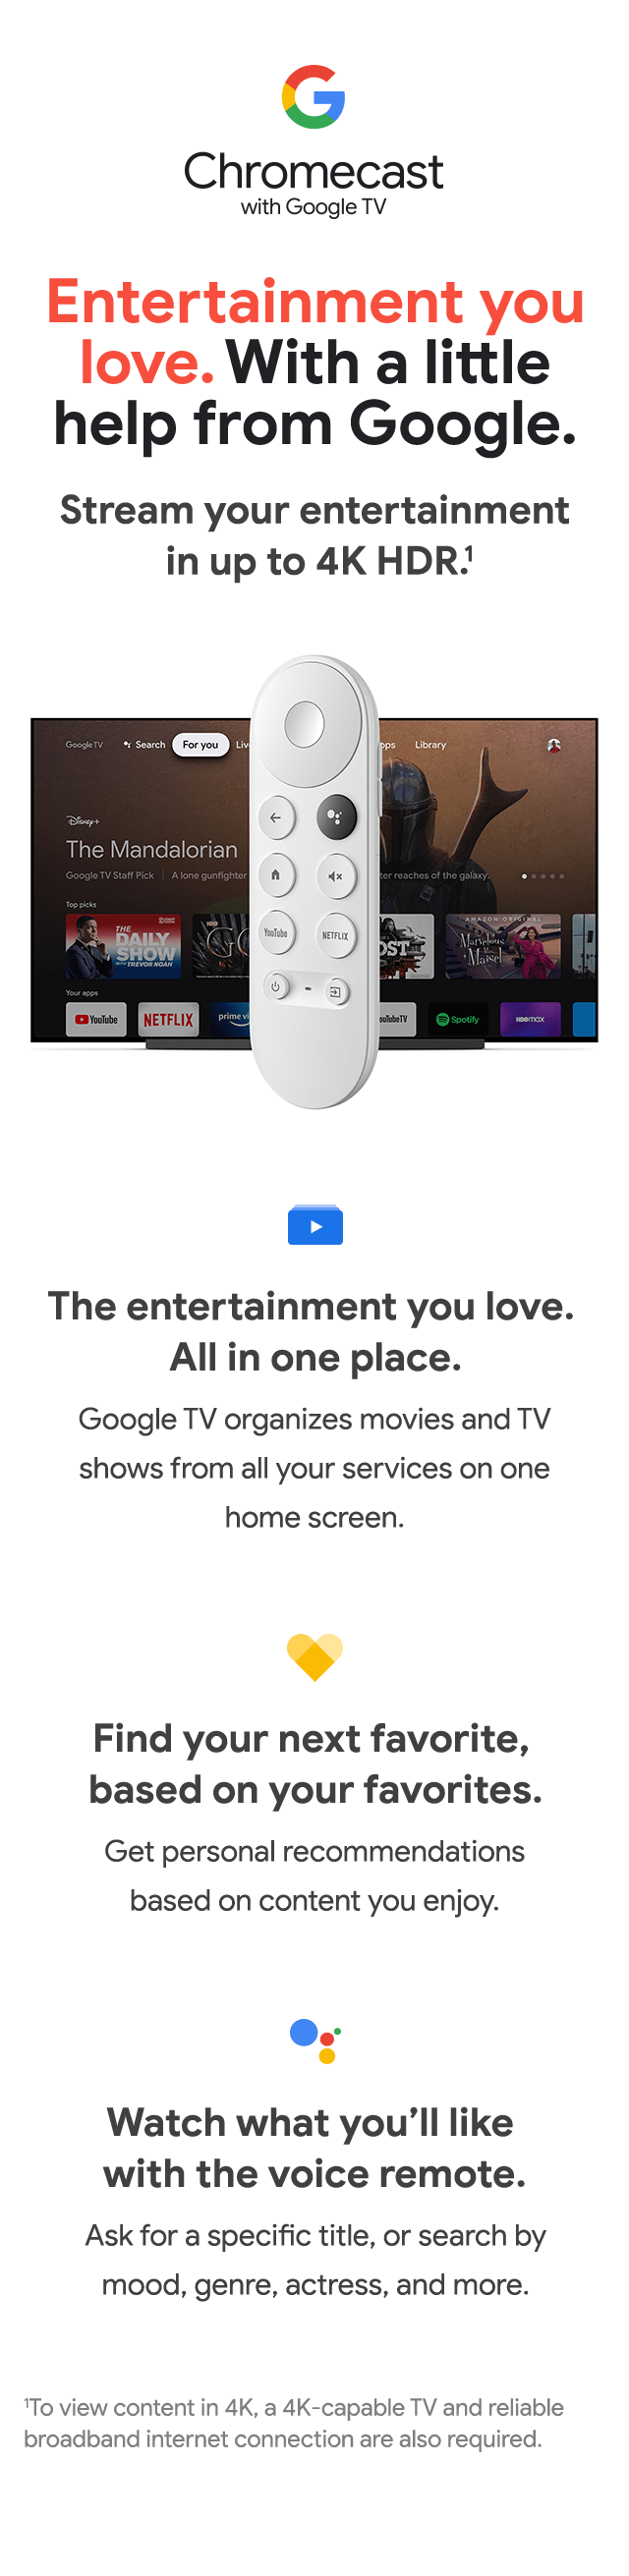 640 Google &Lt;H1&Gt;&Lt;/H1&Gt; Stream The Entertainment You Love To Your Tv In Up To 4K Resolution With The Google Chromecast With Google Tv. This Media Streamer Works With Almost Any Smart Tv With An Hdmi Port And Wi-Fi. Google Tv And Android Apps Give You Access To Movies, Tv Shows, Music, And Much More. Cast From Your Compatible Device, And Use The Voice Remote For Hands-Free Search And Suggestions. Chromecast Chromecast 4 With Google Tv - 4K With Remote - Sky 3 Pin Uk